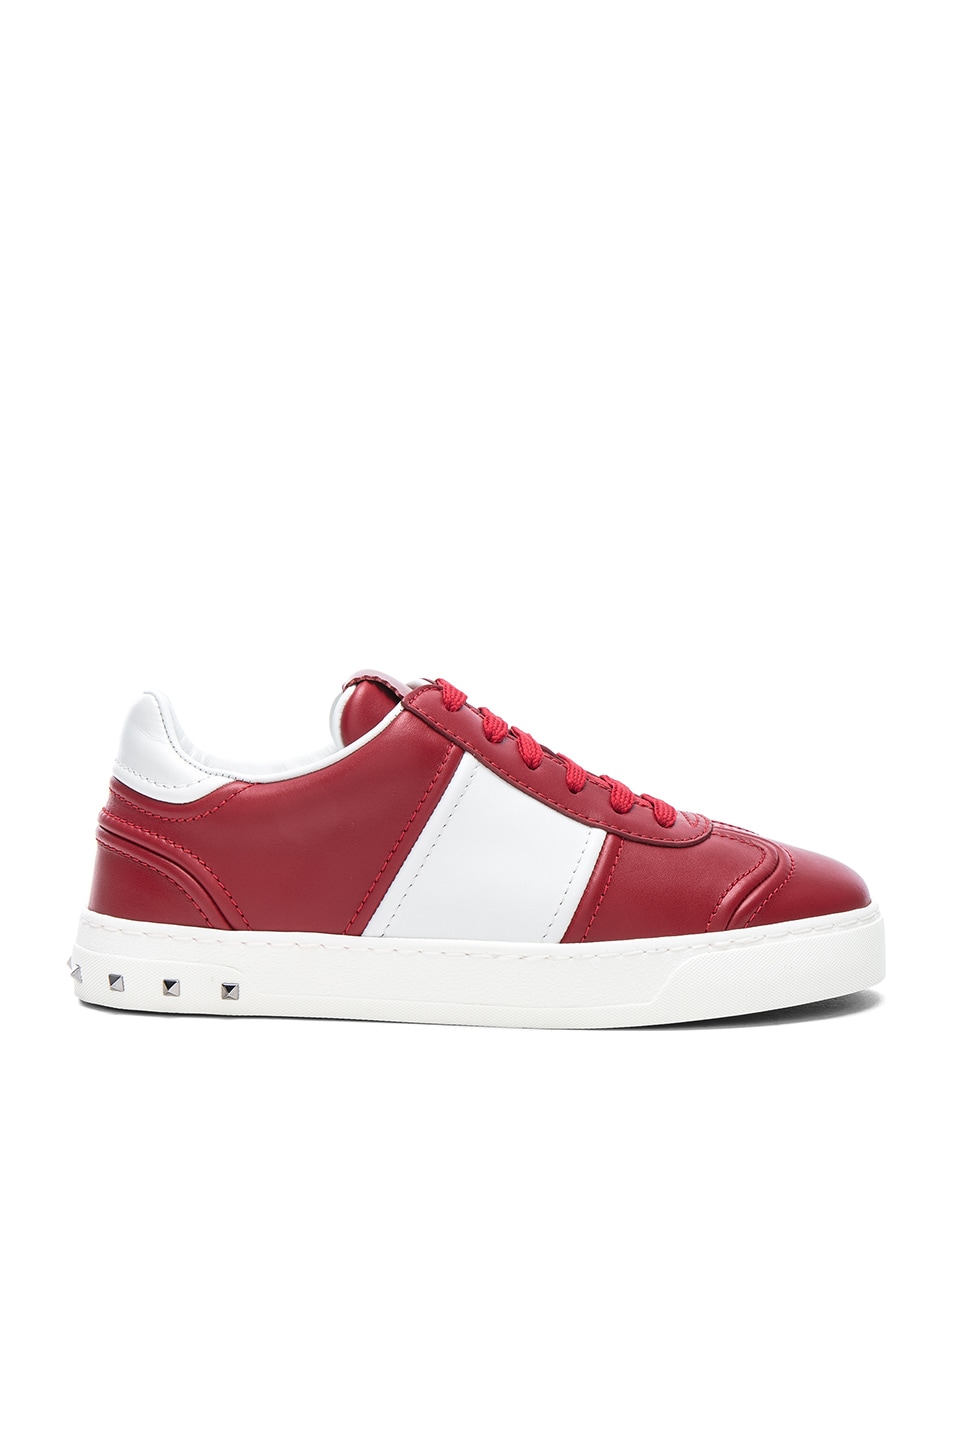 Image 1 of Valentino Garavani Leather Fly Crew Sneakers in Red & White